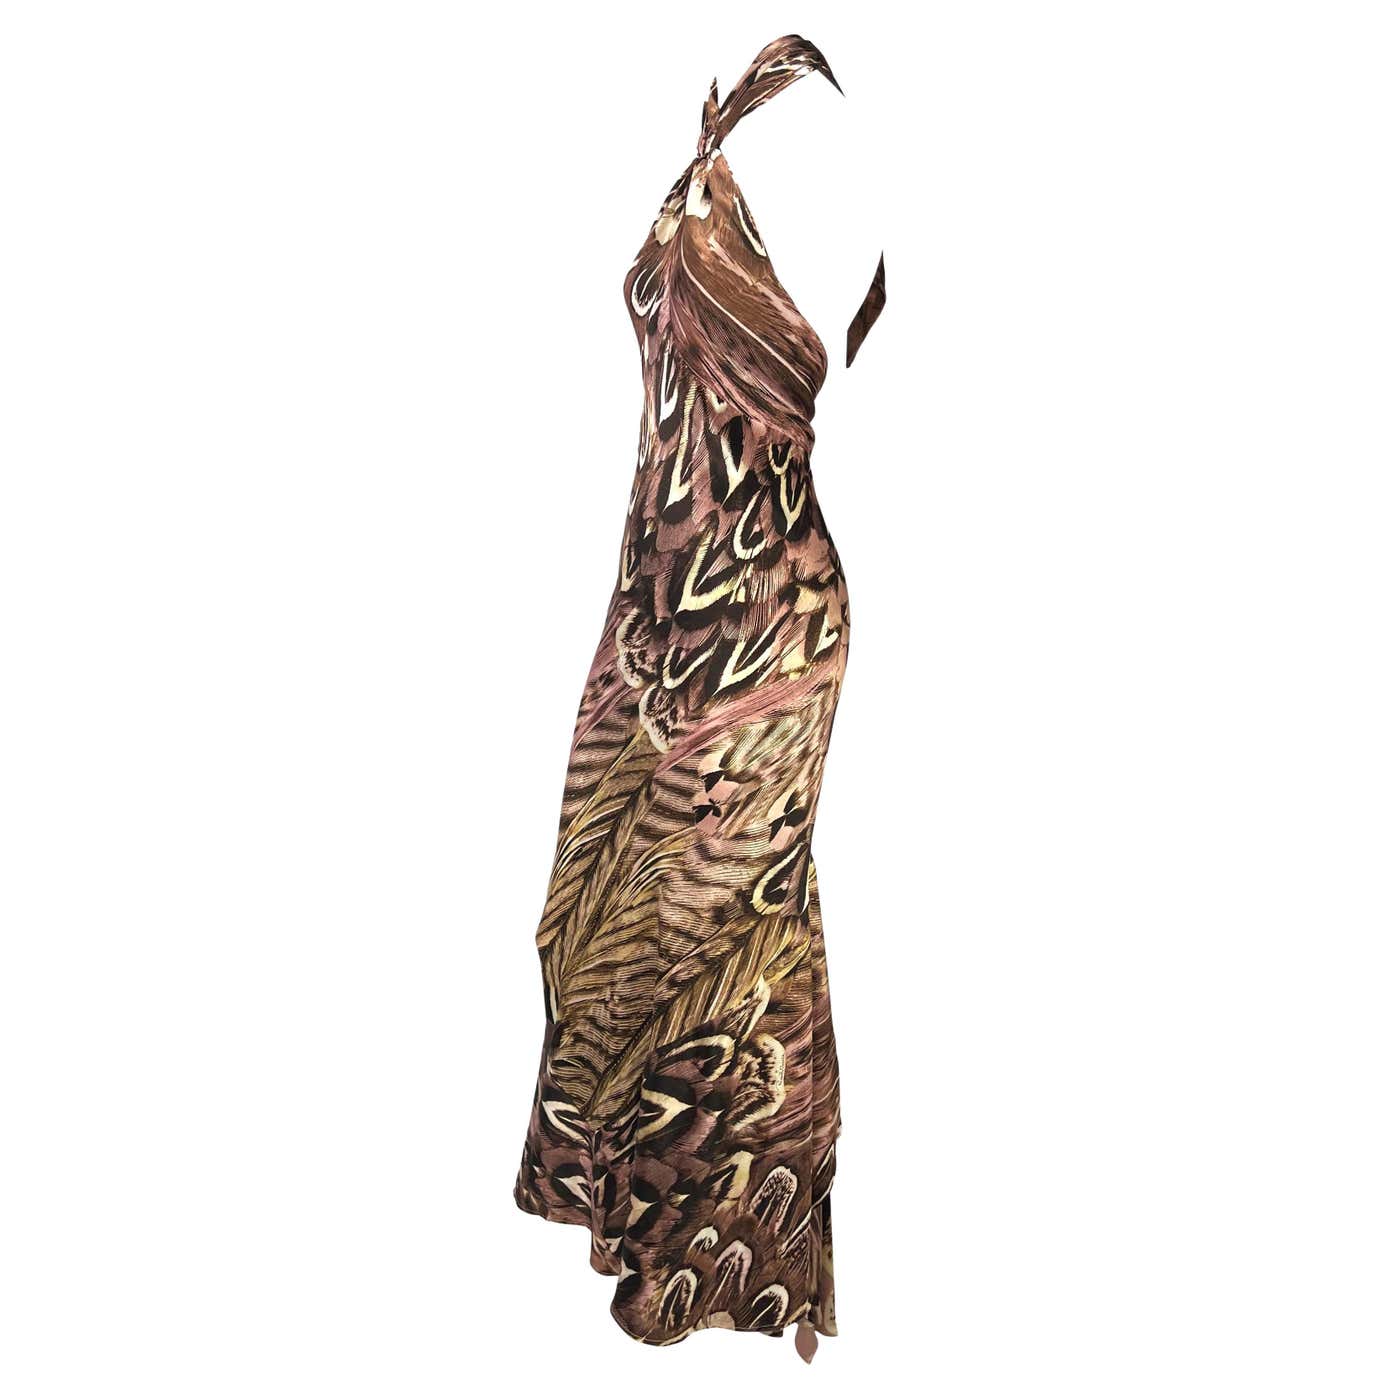 S/S 2005 Roberto Cavalli Silk Feather Print Halter Top Backless Gown ...